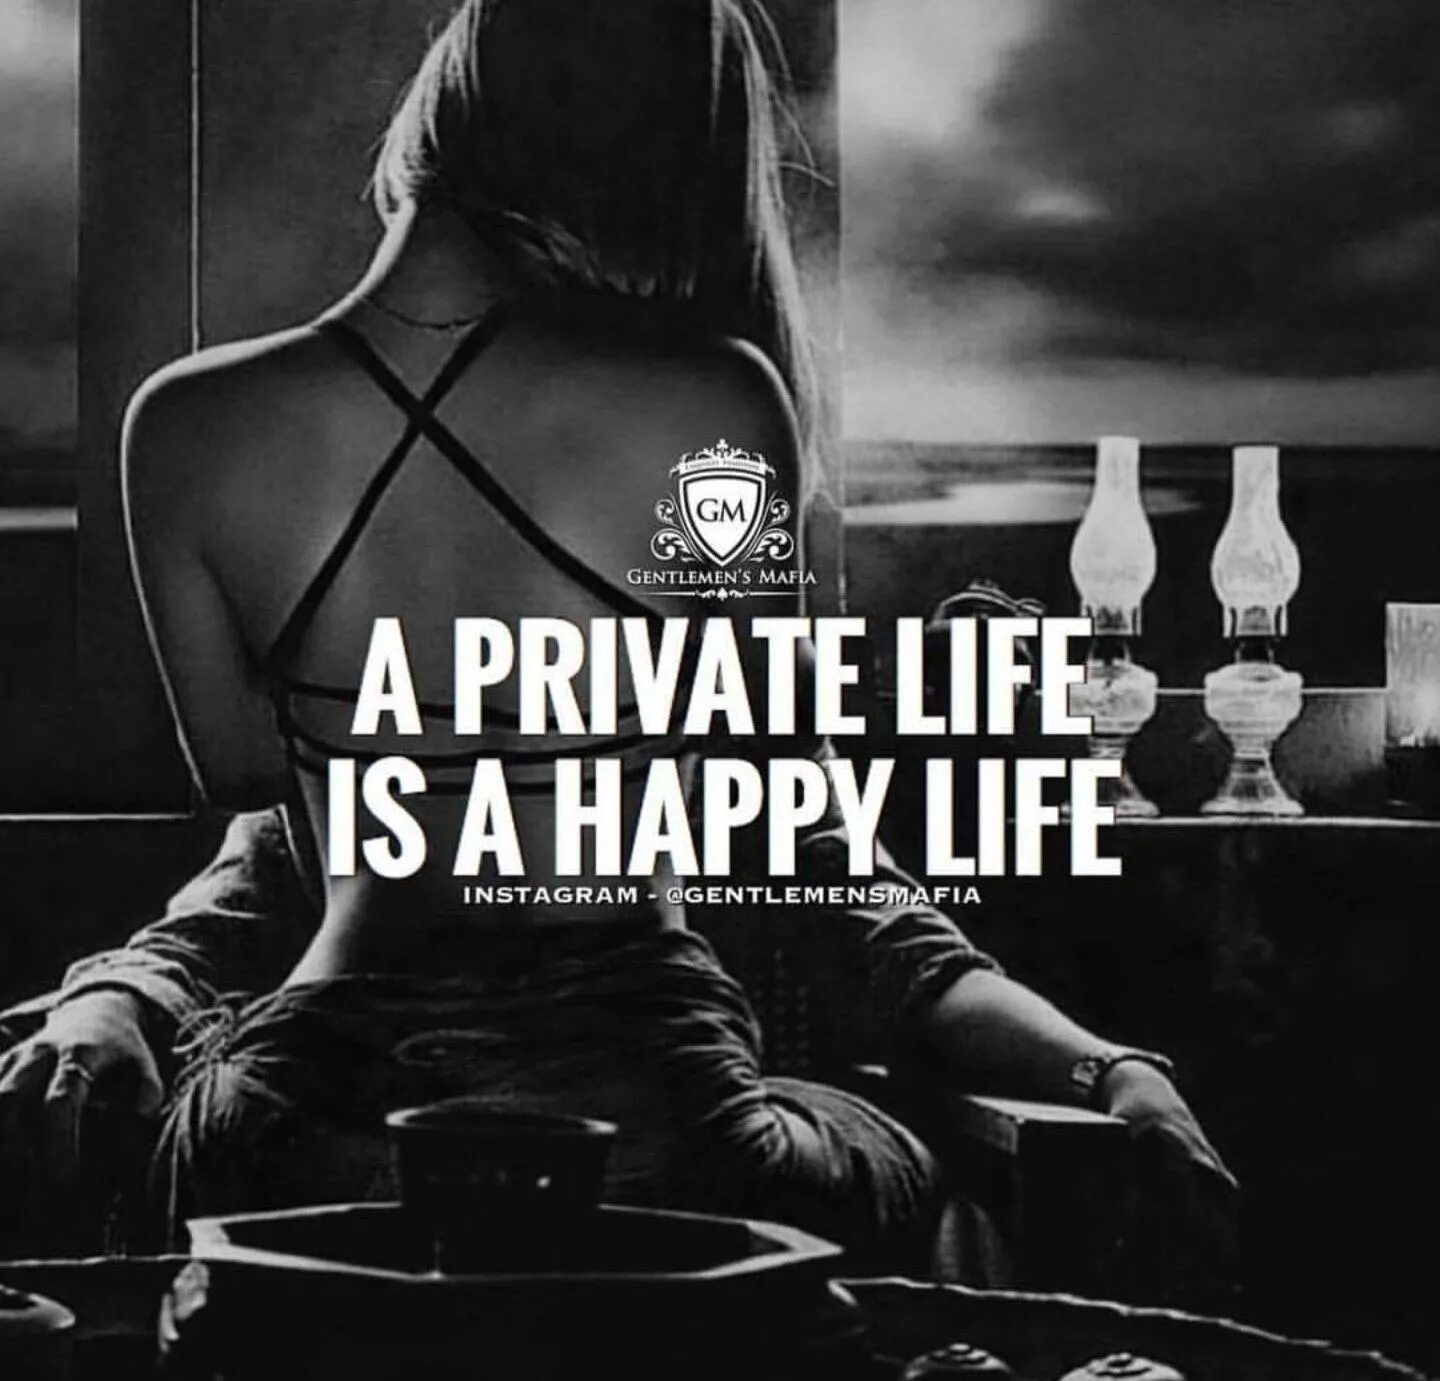 Quotes about private Life. Privat Life. Happy Life. Your_Life приват.